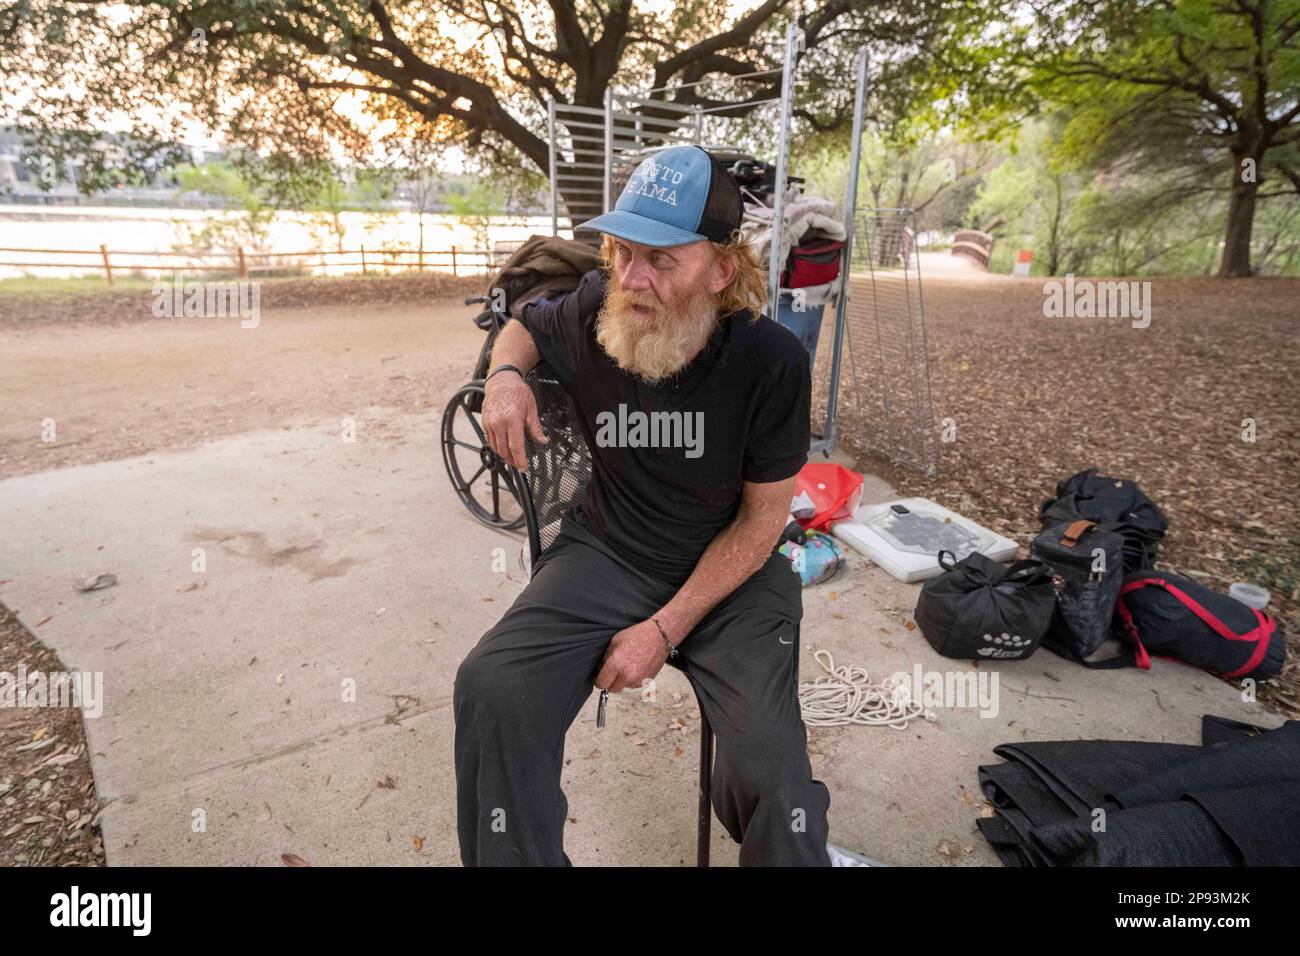 A homeless man, who wished not to be identified, sits with most of his belongings at the hike and bike trail along the north shore of Lady Bird Lake in downtown Austin on March 9, 2023. The man, who has camped along the shoreline for about 9 months, was finally asked to leave by crews building a split-rail fence and adding lighting following a recent drowning death in the lake. ©Bob Daemmrich Stock Photo